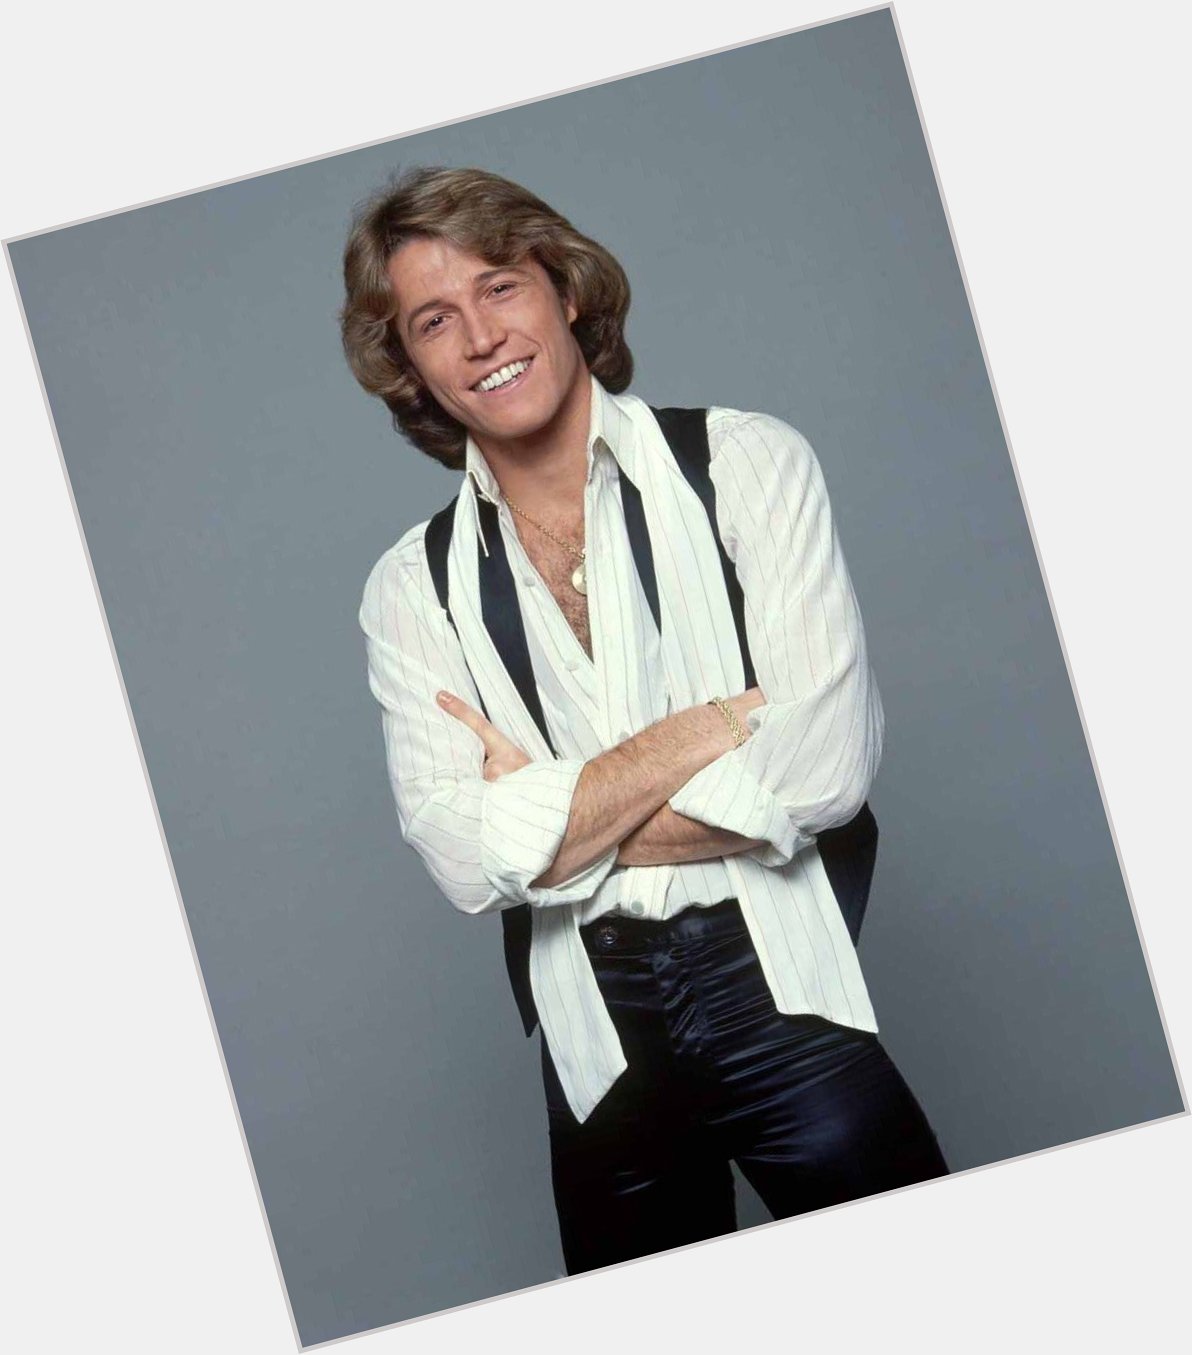 Happy Birthday to Andy Gibb! He would have been 61 today.  